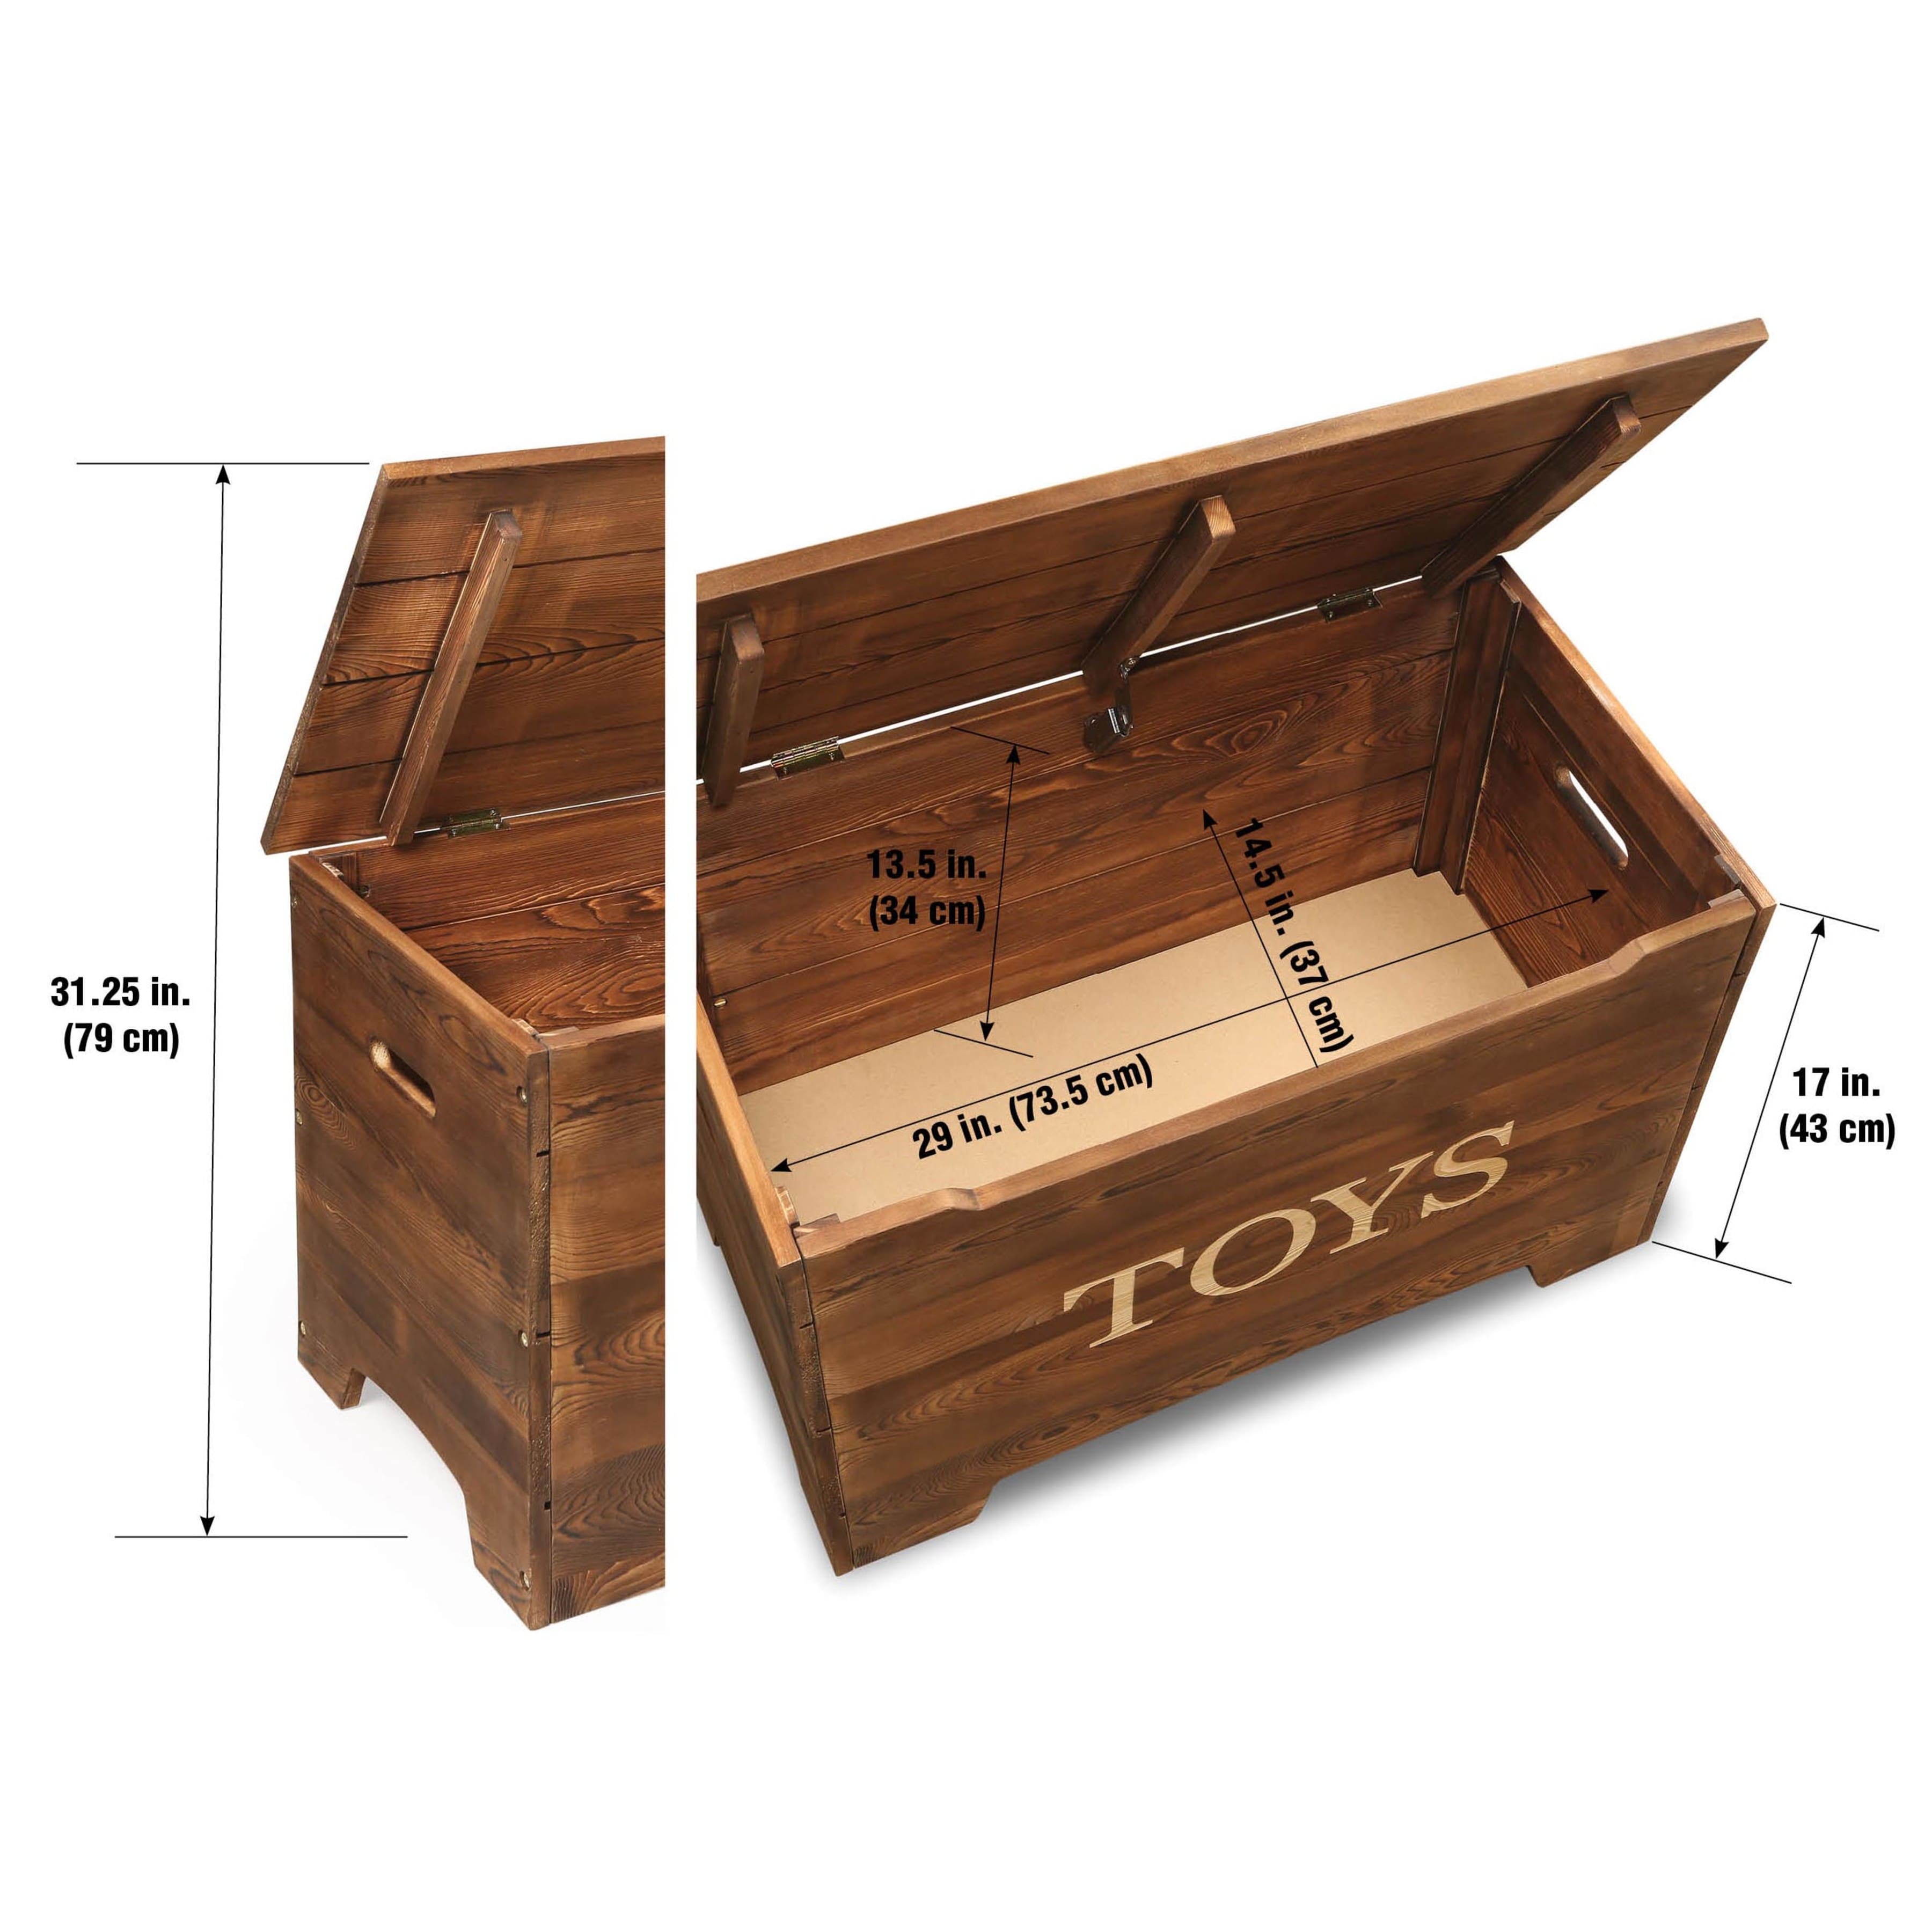 Reclaimed Wood Toy Box Toy Storage Wooden Toy Chest Playroom